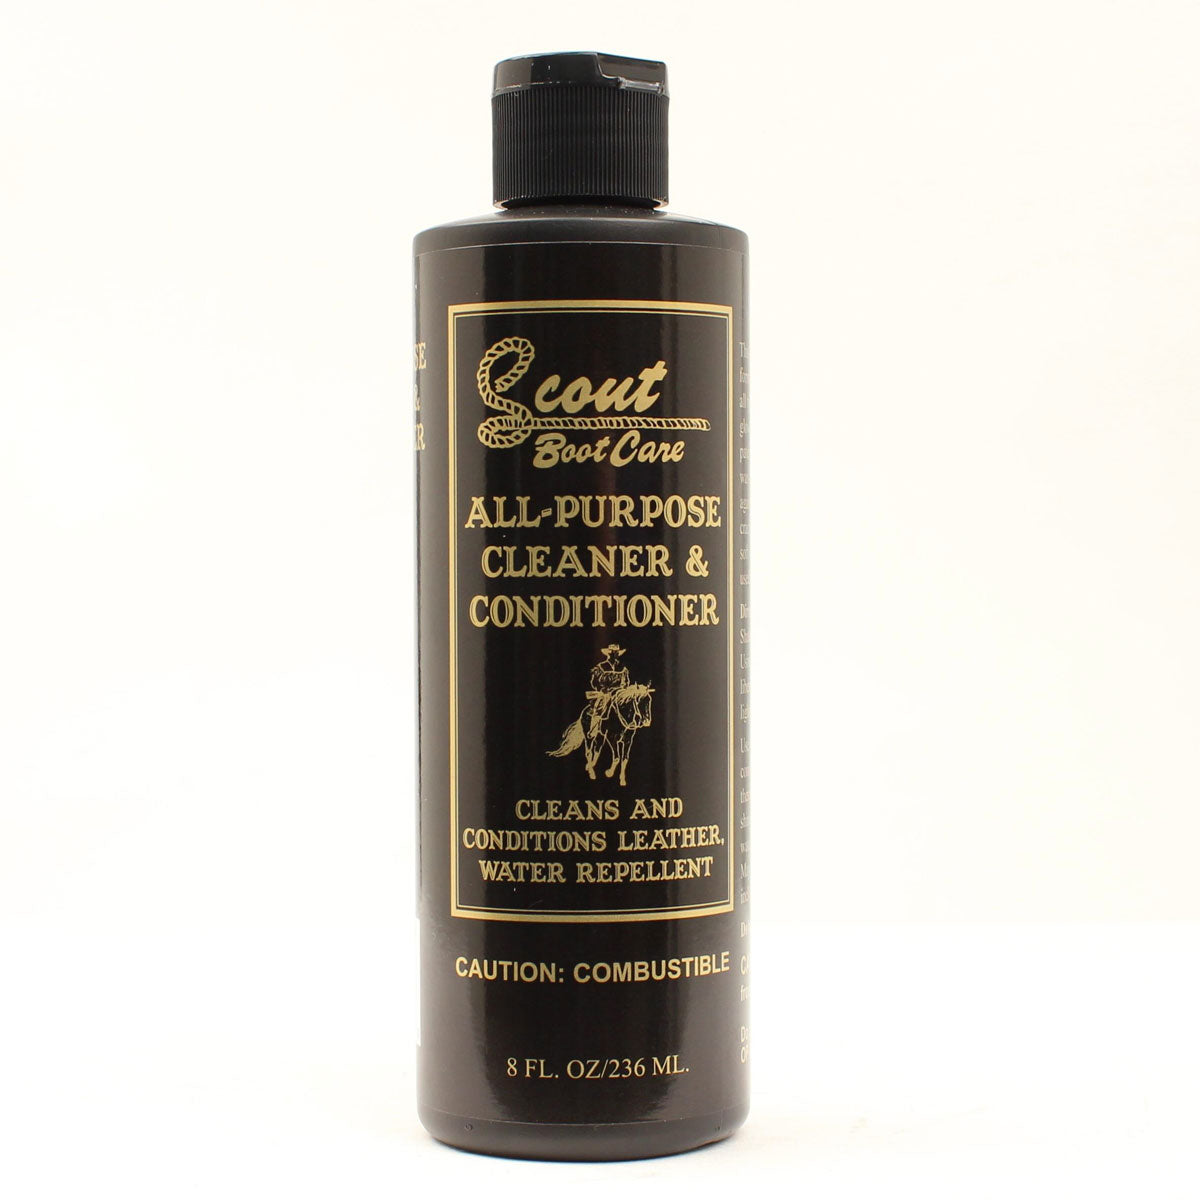 SCOUT ALL PURPOSE CLEANER & CONDITIONER 8 OZ.